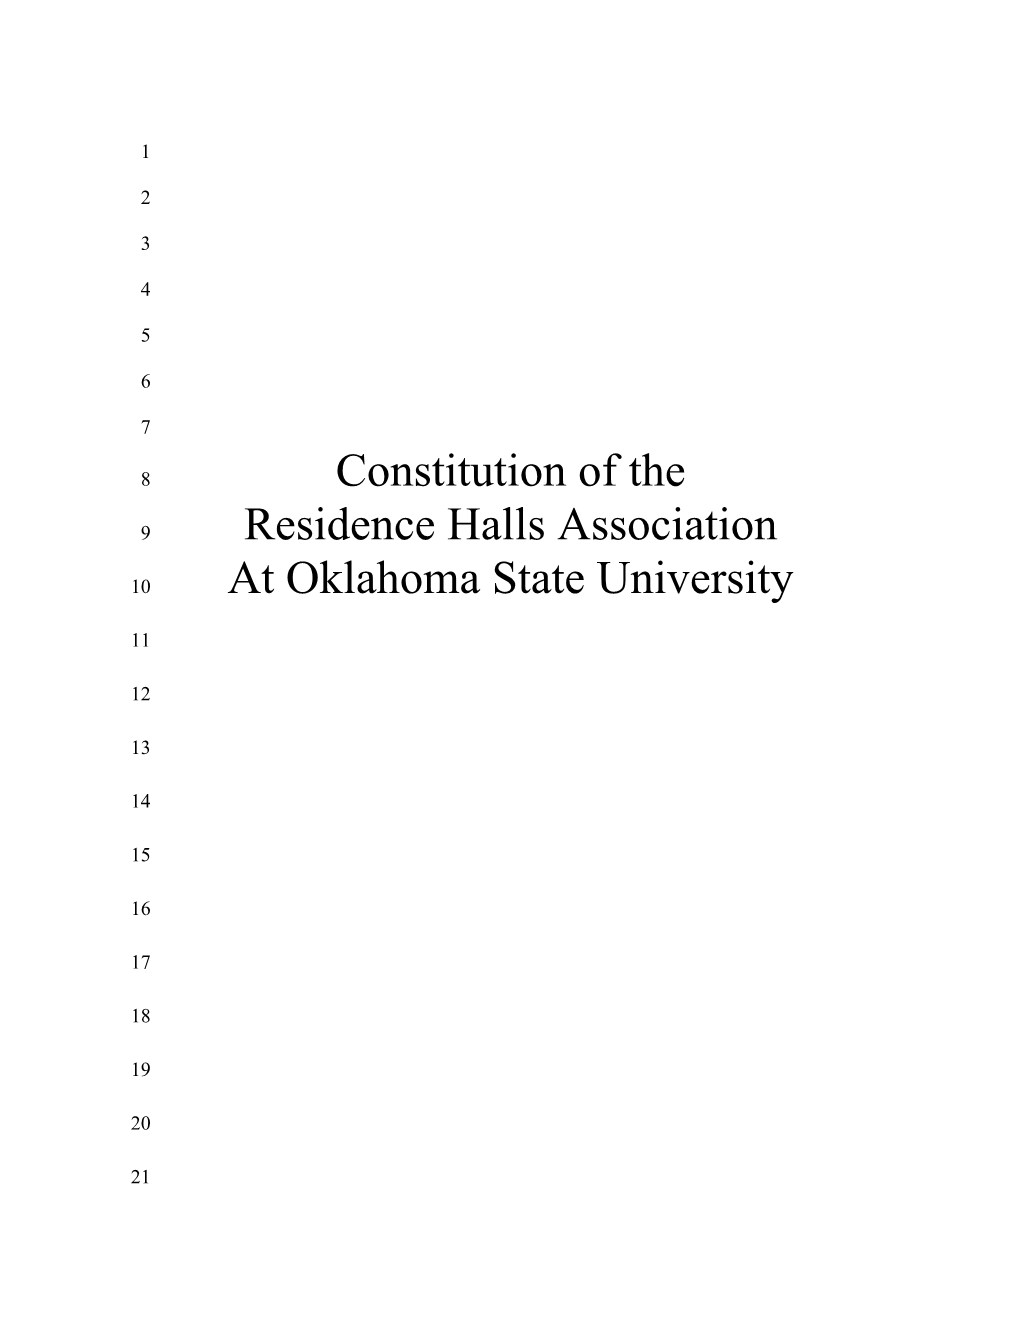 Constitution of the Residence Halls Association of Oklahoma State University